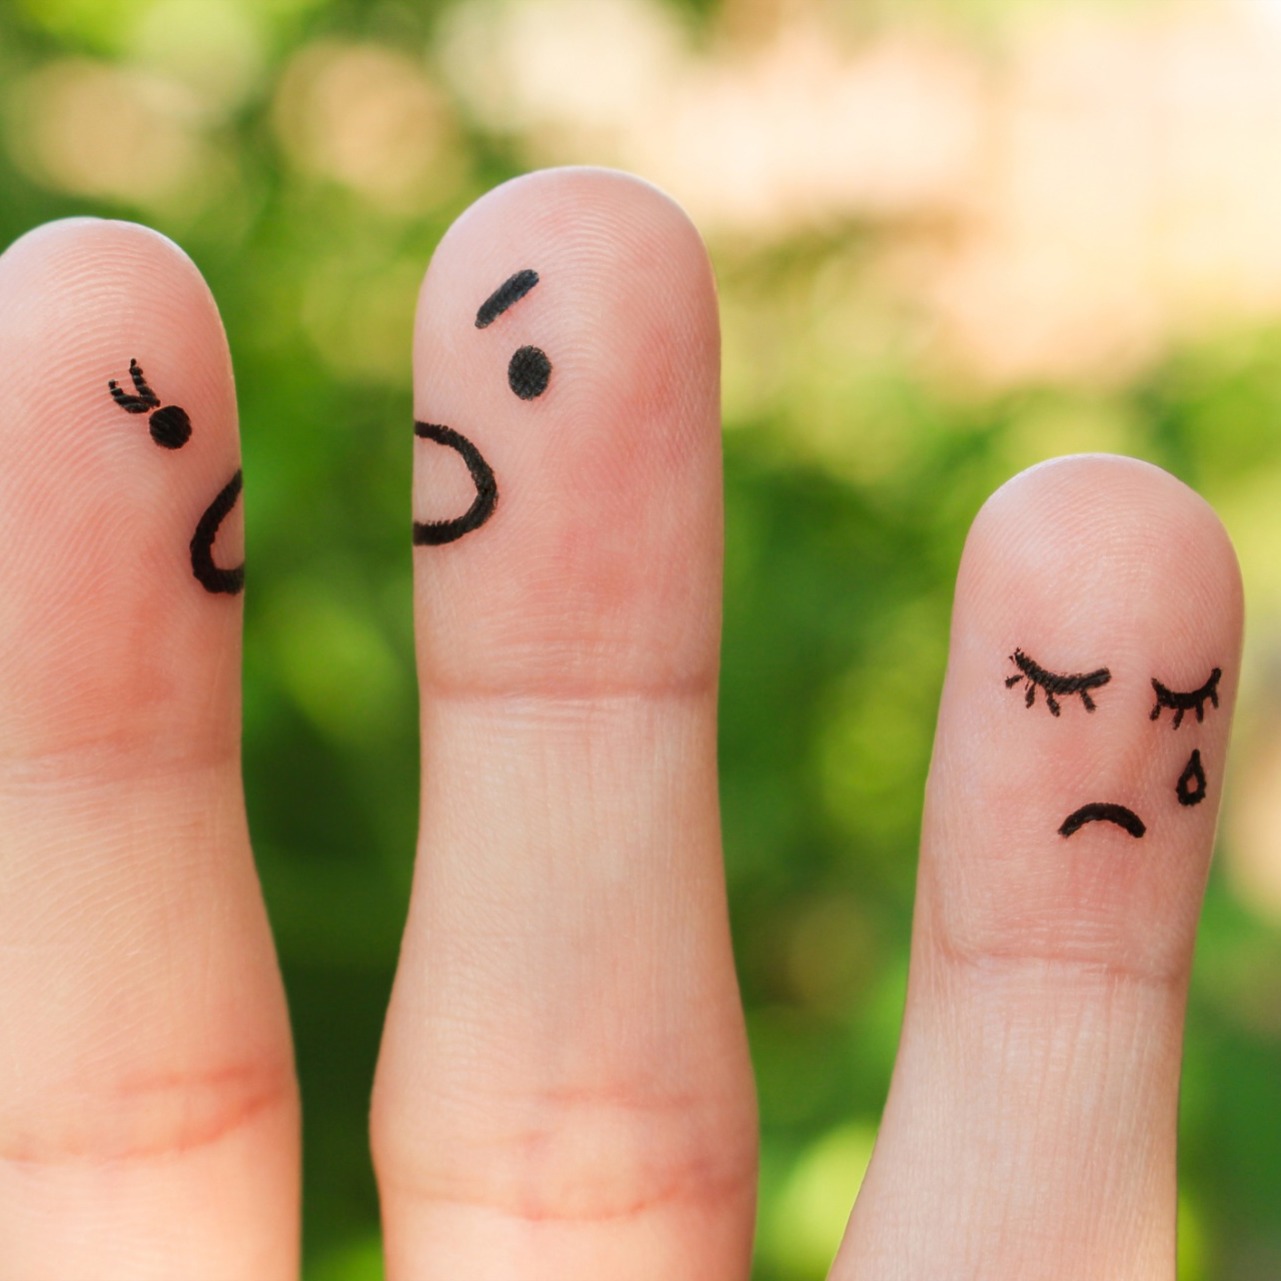 Two angry faces drawn onto fingers, next to a sad face drawn onto a finger